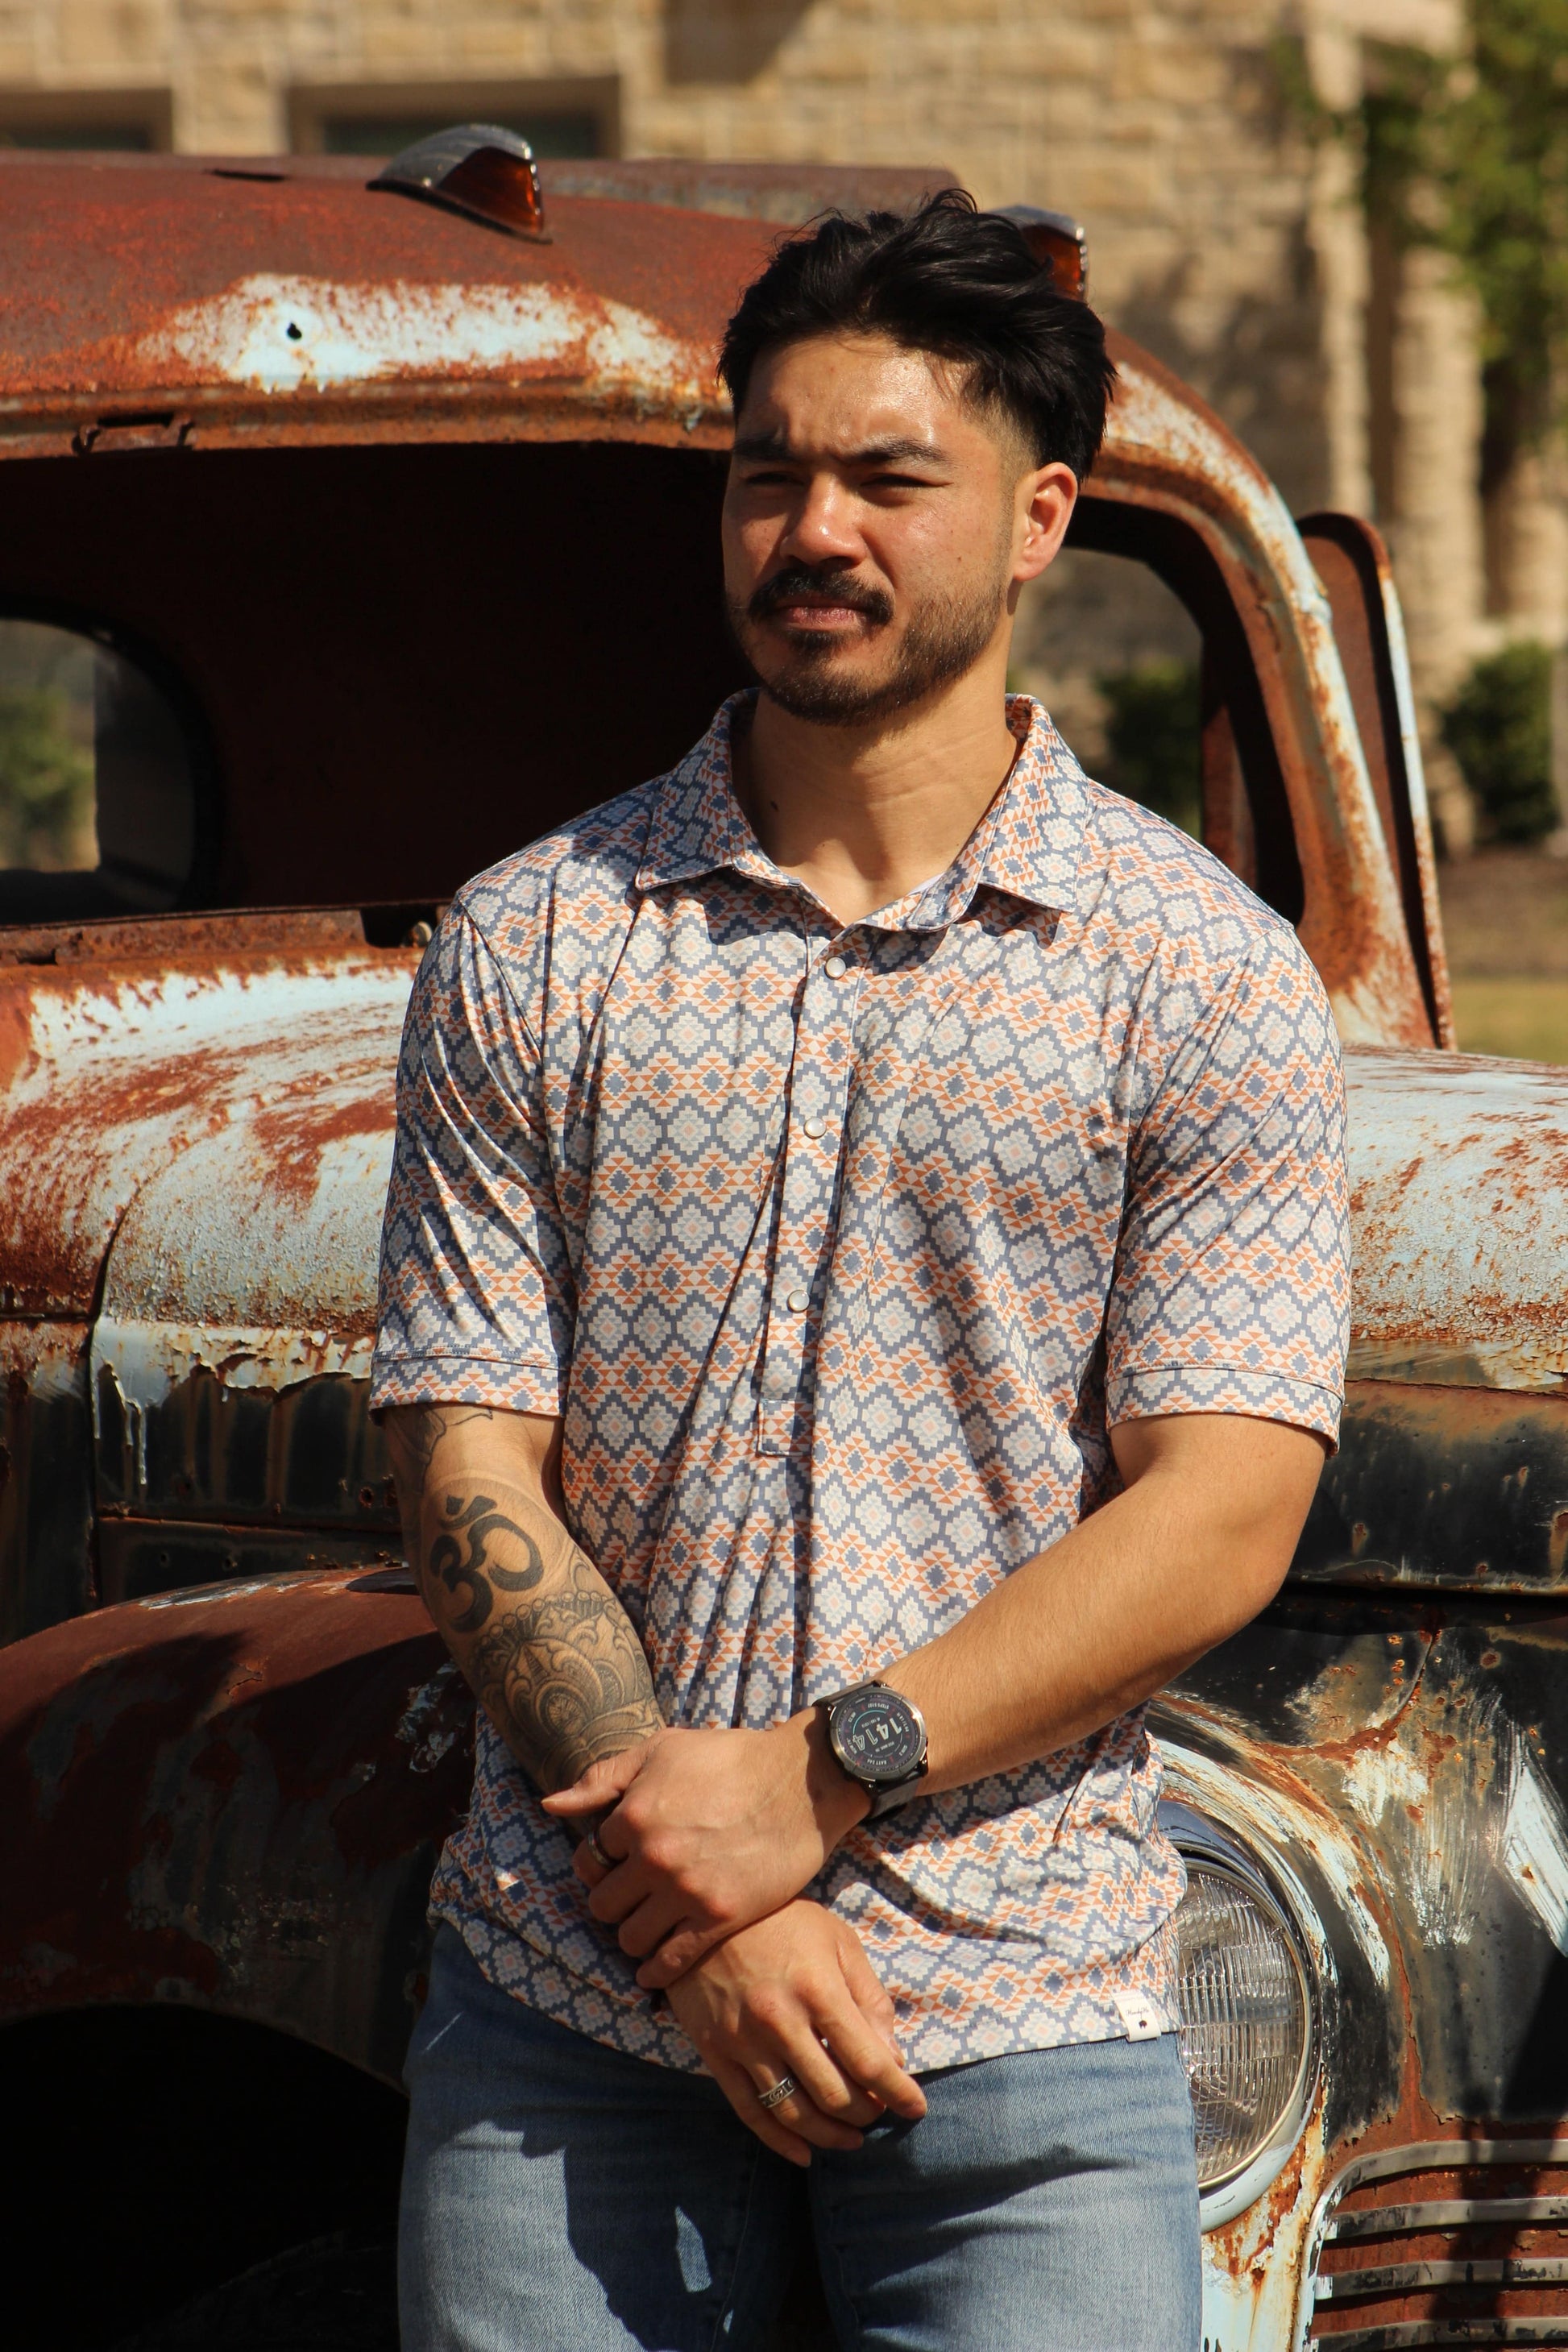 A man stands in front of a vintage rusted truck, modeling the HowdyHo Aztec Twilight Blend shirt. The short-sleeved shirt boasts a complex Aztec pattern in shades of blue and orange, offering a modern twist on classic southwestern motifs. His casual stance, with arms crossed, along with the rugged outdoor backdrop, highlights the shirt's adventurous spirit and durability.